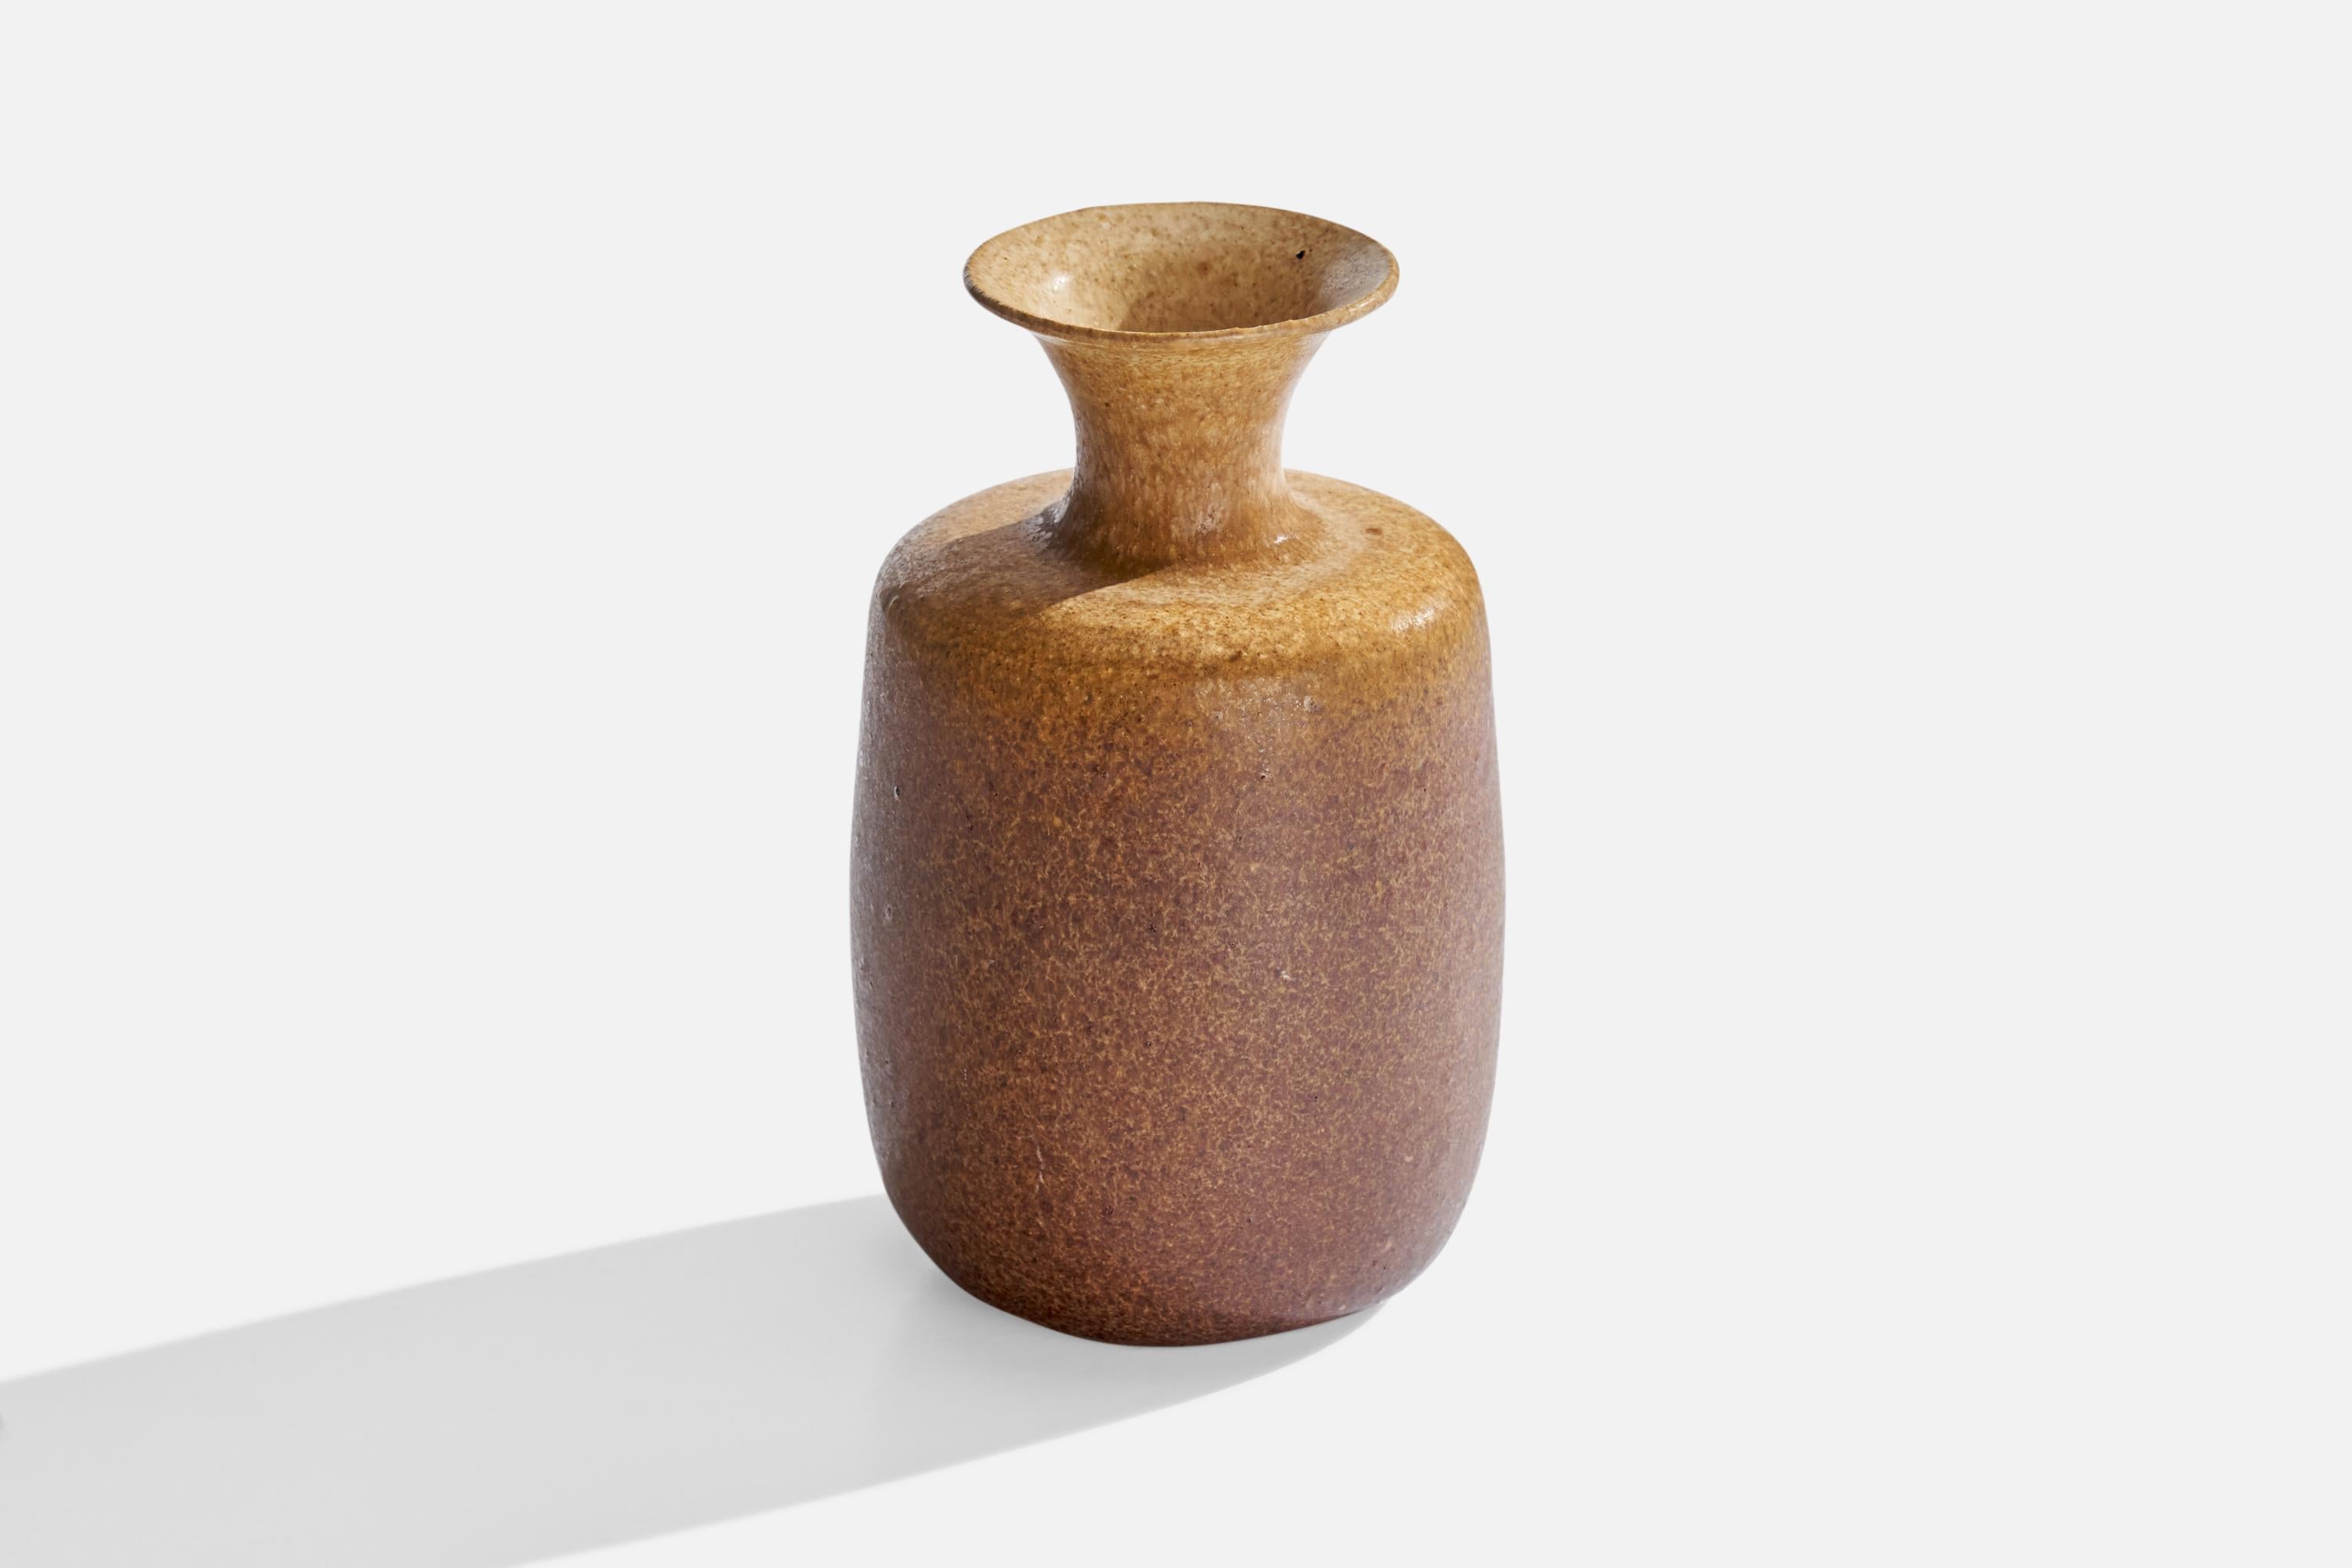 A brown and beige ceramic vase designed and produced in Sweden, c. 1960s.